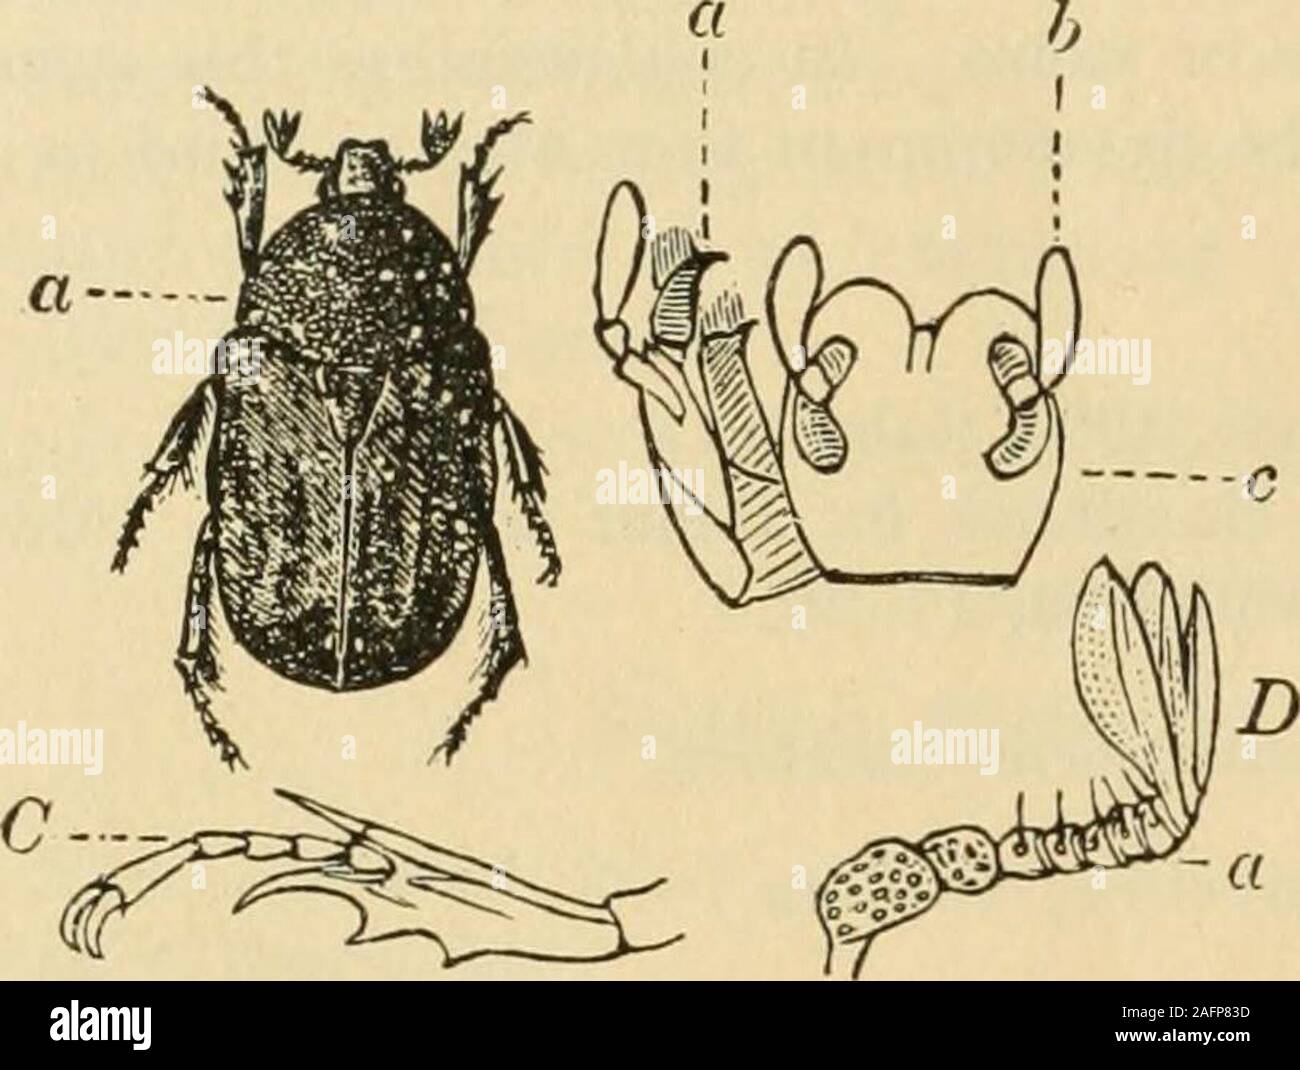 . A manual of dangerous insects likely to be introduced in the United States through importations. nder bark above the ground, causing reddening of plant. (See text fig. 102.)Pentodon punctatus Kirby; Europe; Africa; larva destructive to roots.Oxythyrcafunesta Poda; Italy; damages leaves. Tenebrlonldse. Blaps mibcronita Latreille; Italy. Entochiralateralis Boheman; Java. (See Sugarcane.) Gonocephalurn intermedium Fischer; Bessarabia; causes stunted growth by boring. Gonocephalum acutangulum Fairmaire; Java;^ j^ bores in stalks: O. (Opatrum) pusillum Fab- ricius; Europe; borer.Pedinusfemoralis Stock Photo